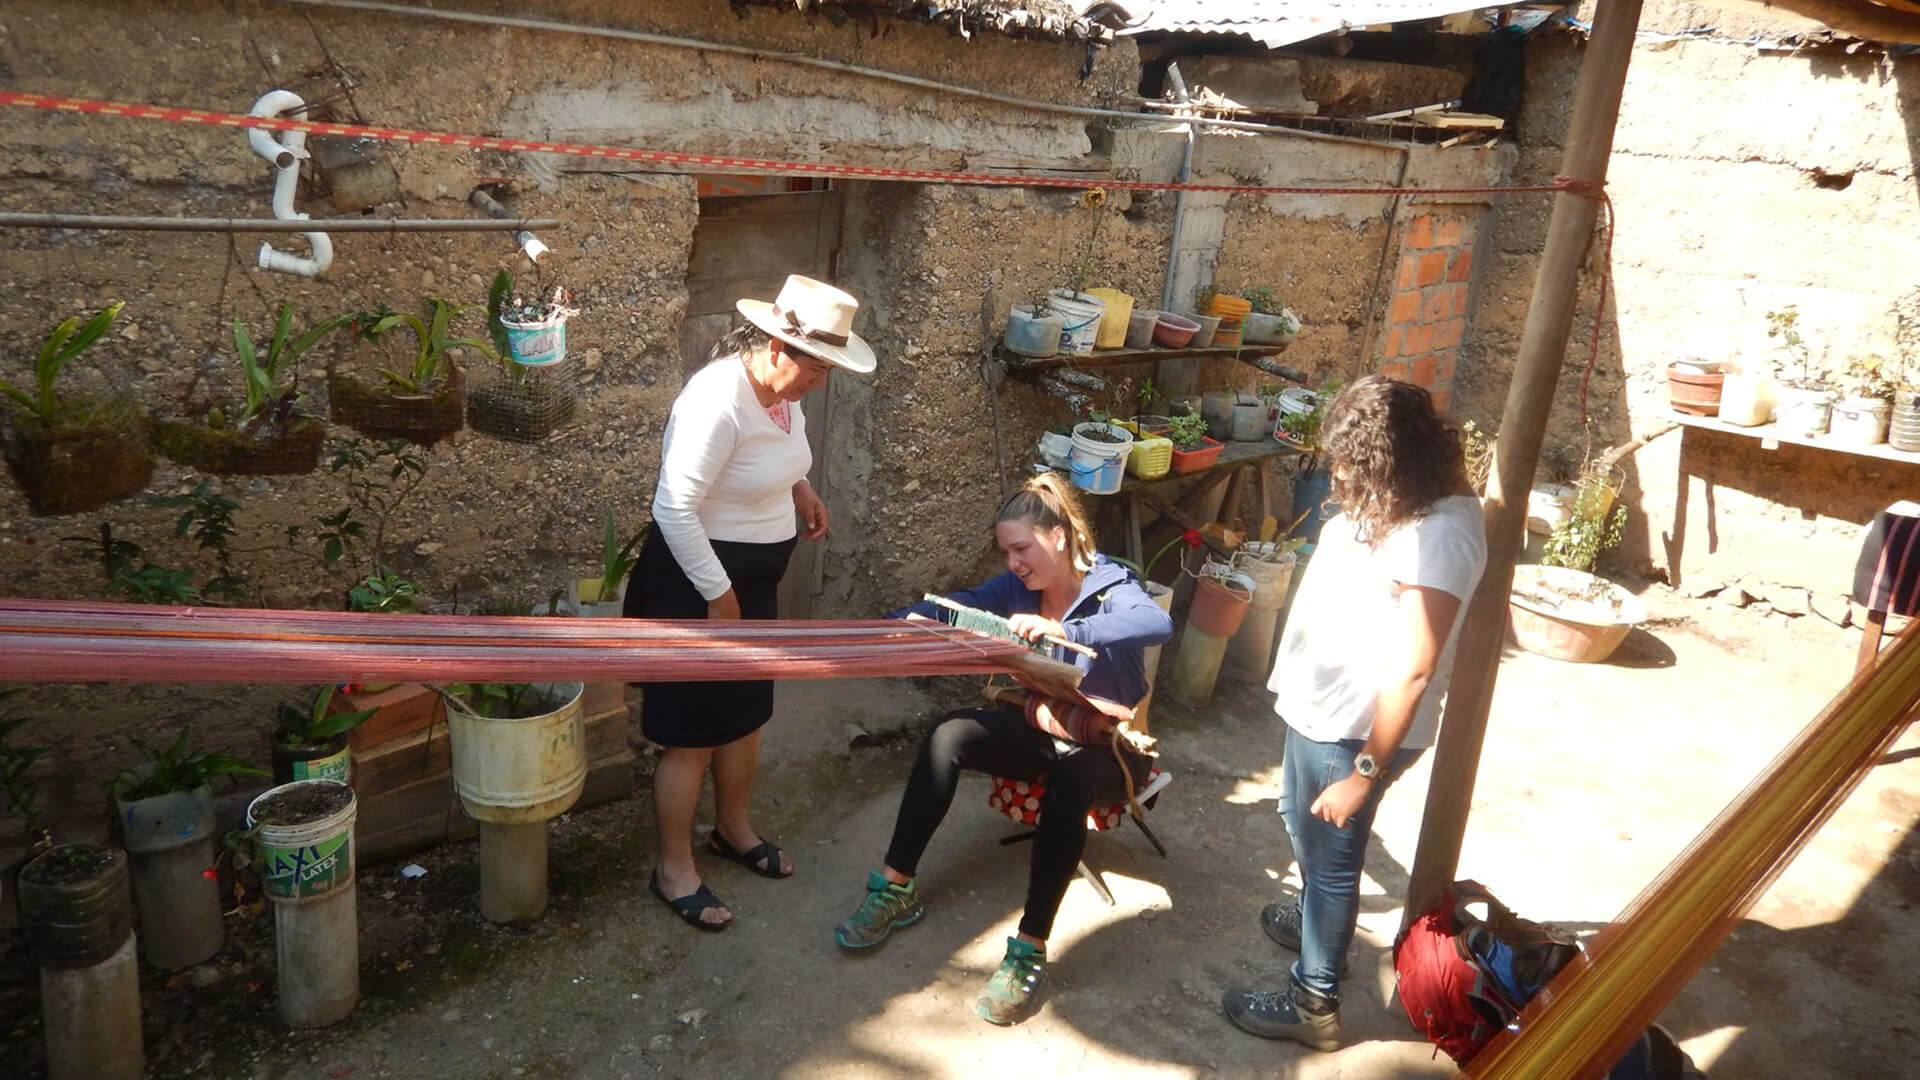 Two local women guiding a young foreigner lady in the use of the traditional loom